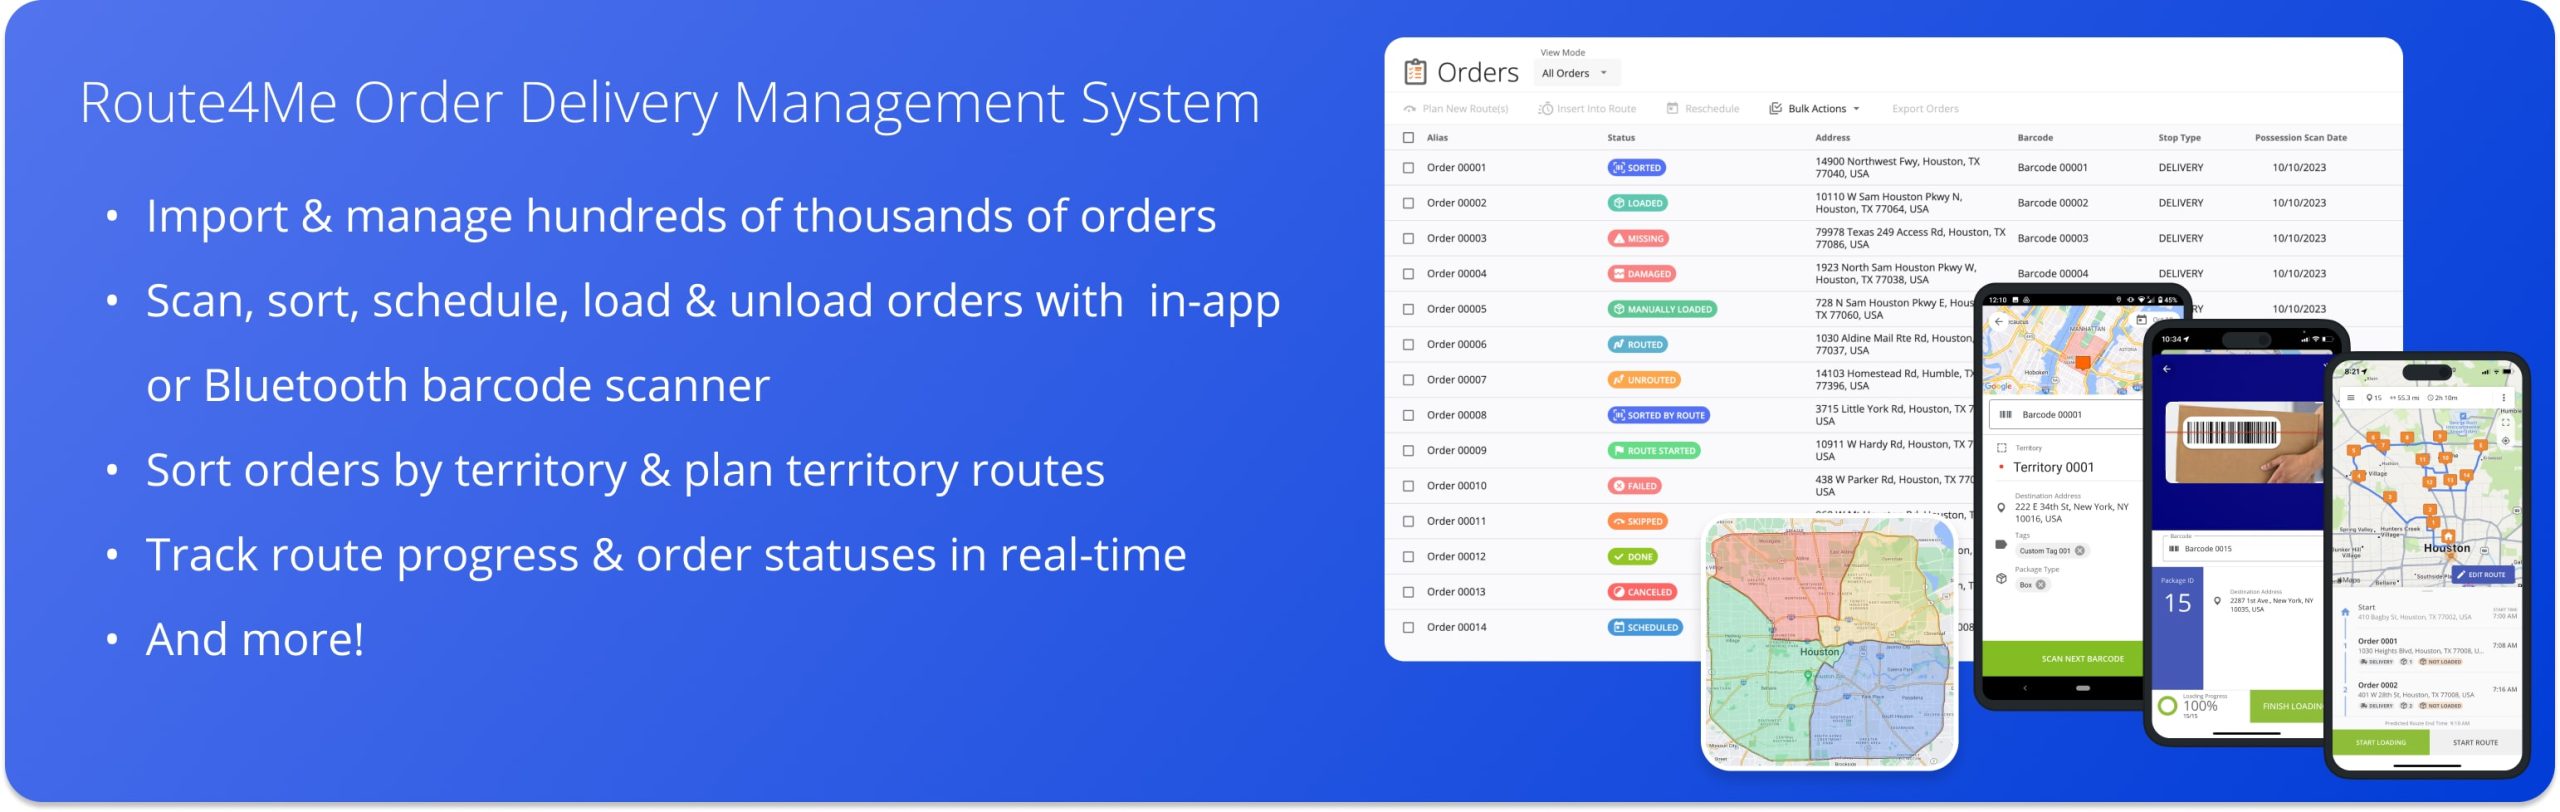 Route4Me's Order Delivery Management System can import, sort, manage, schedule, plan, and optimize routes with orders.